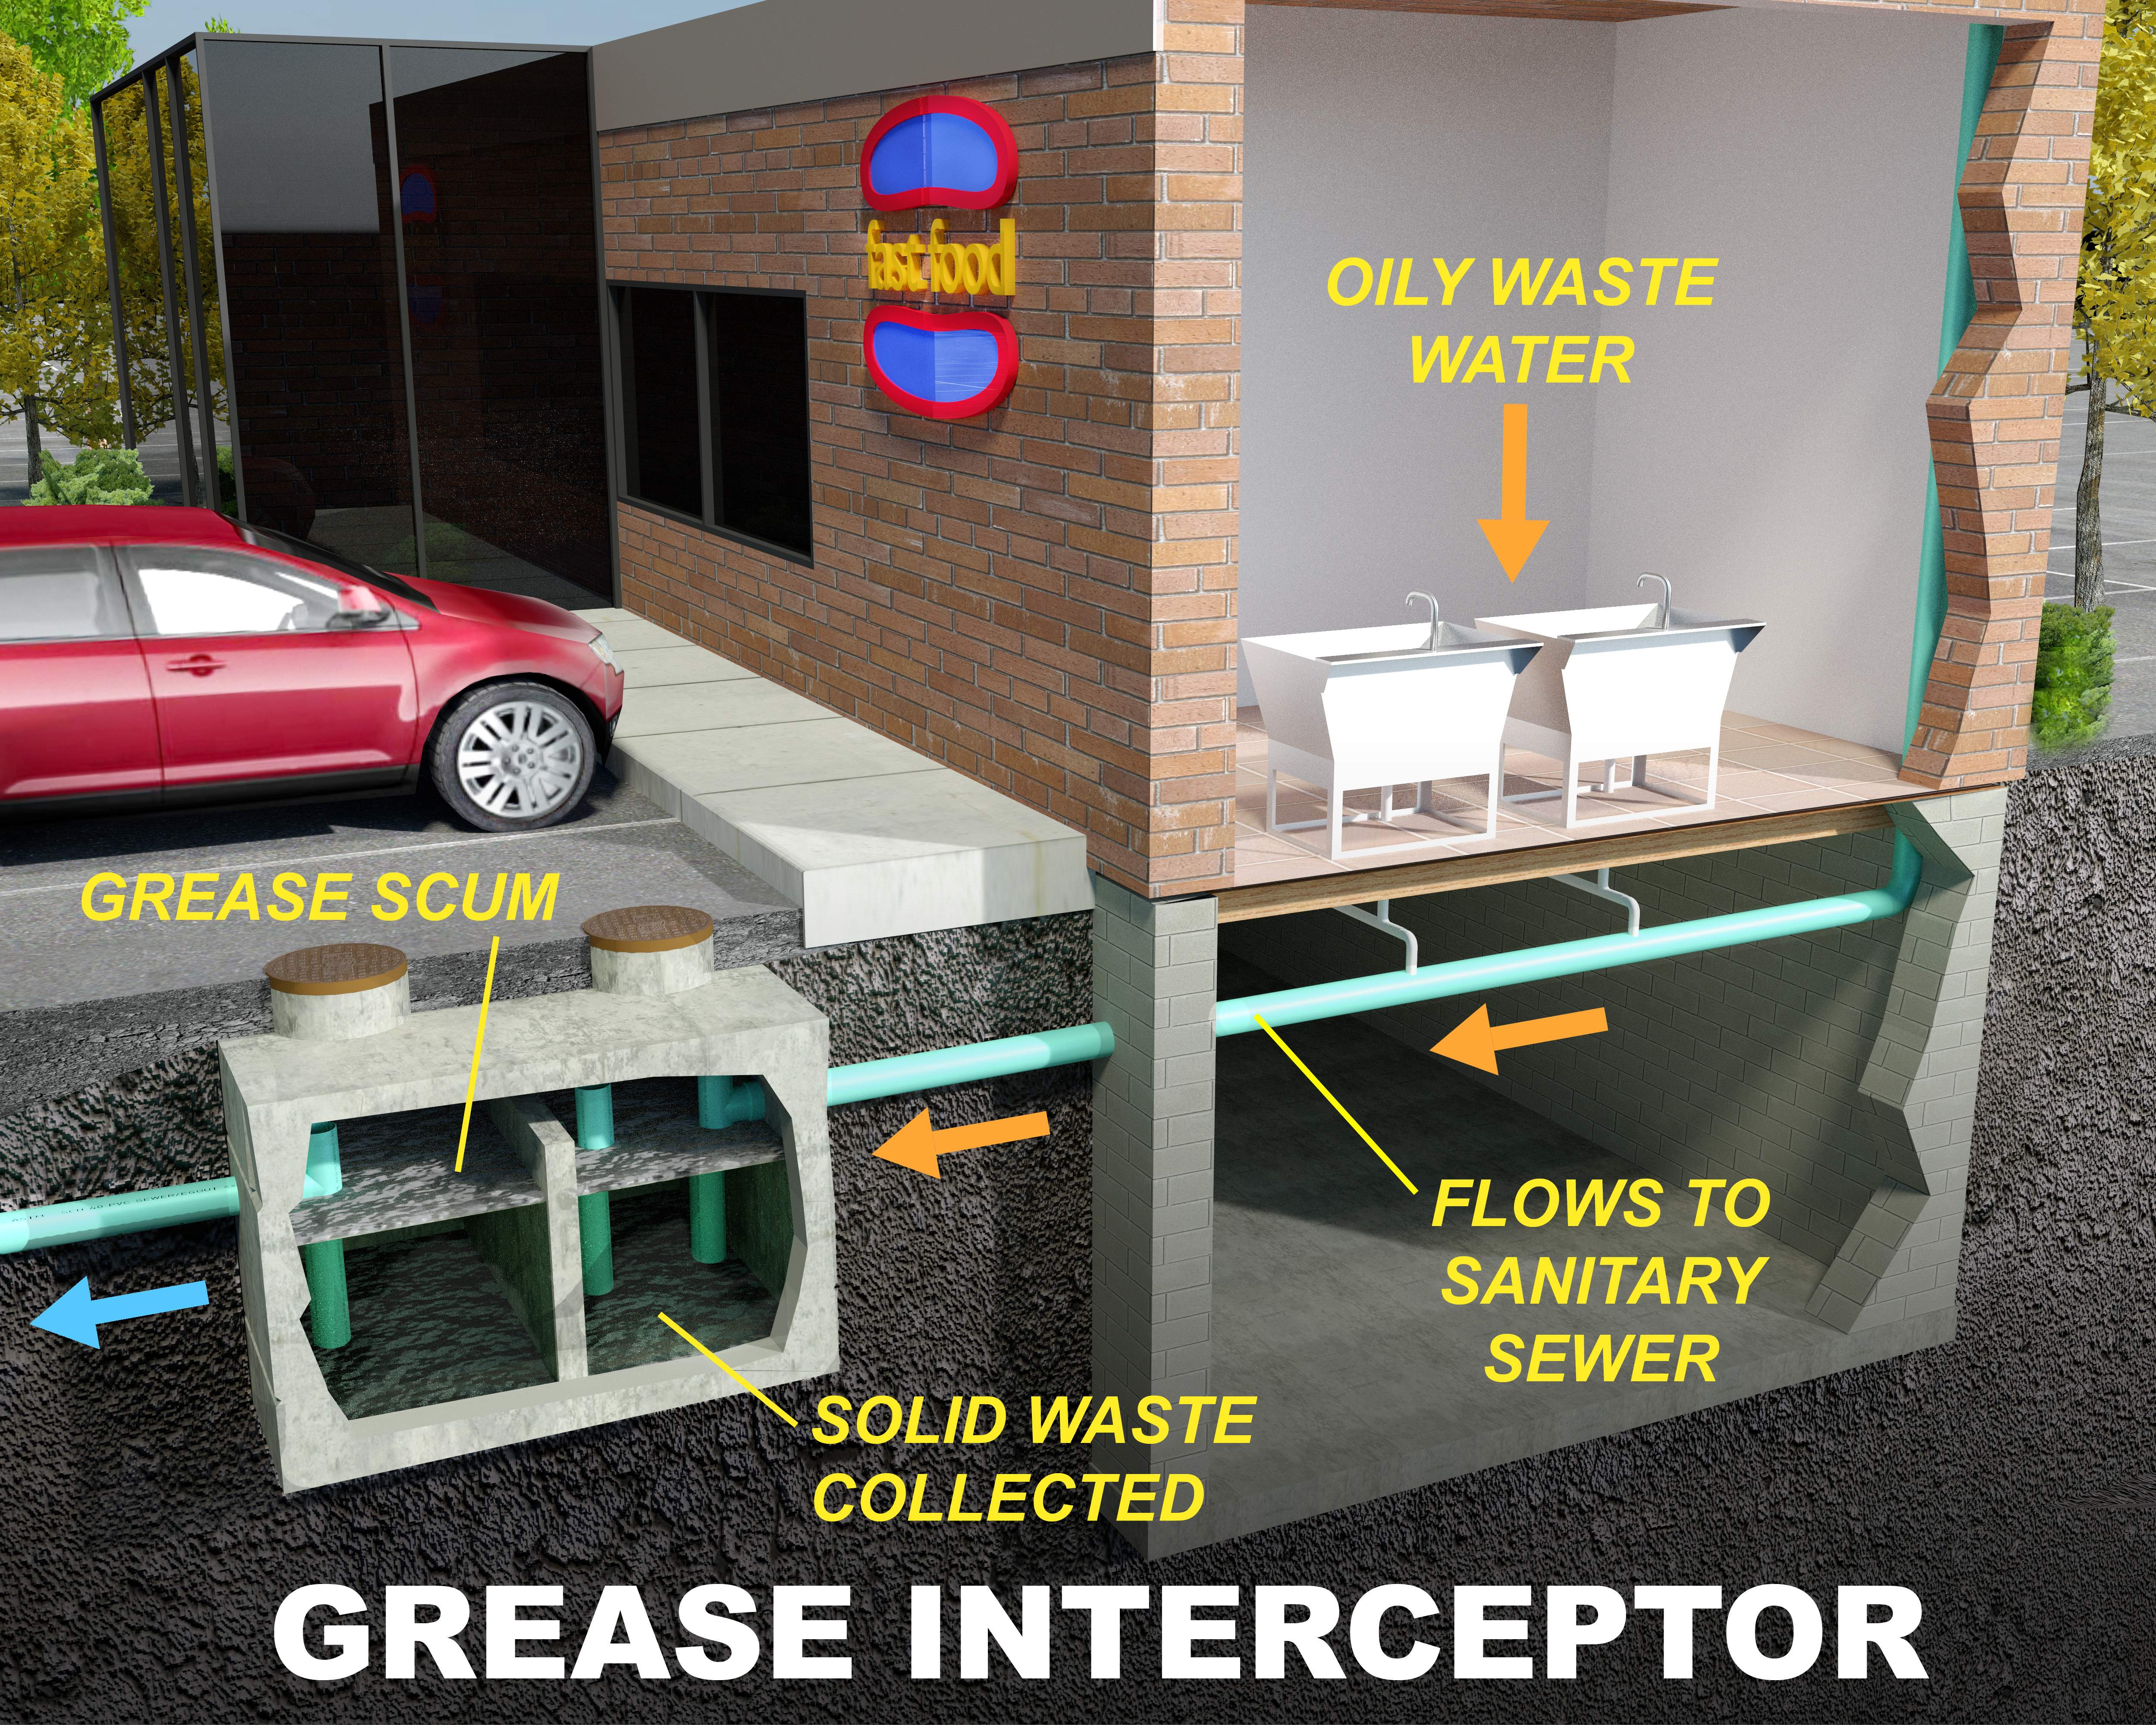 Grease and Grit Trap Cleaning in Houston, TX Restaurant (or) Commercial Grease Trap Cleaning